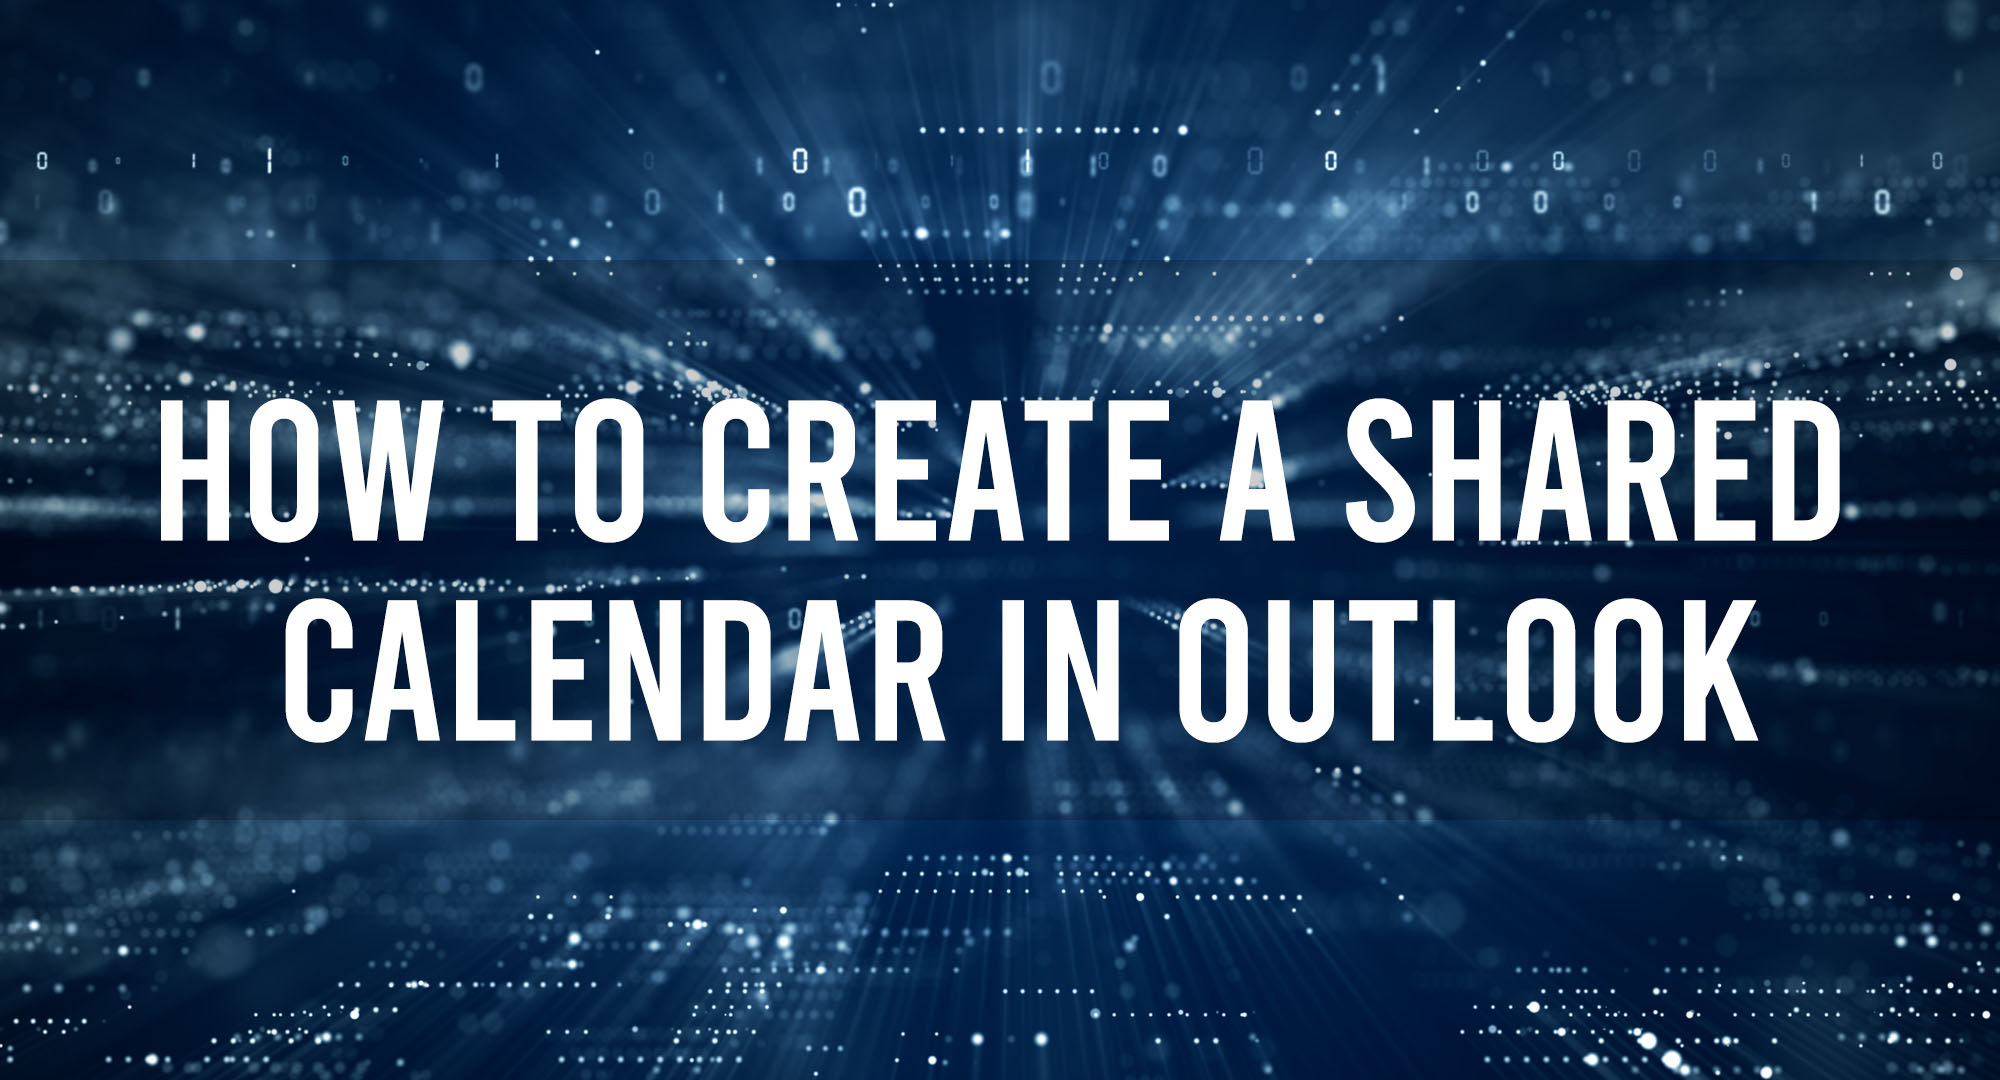 How to create a shared calendar in outlook